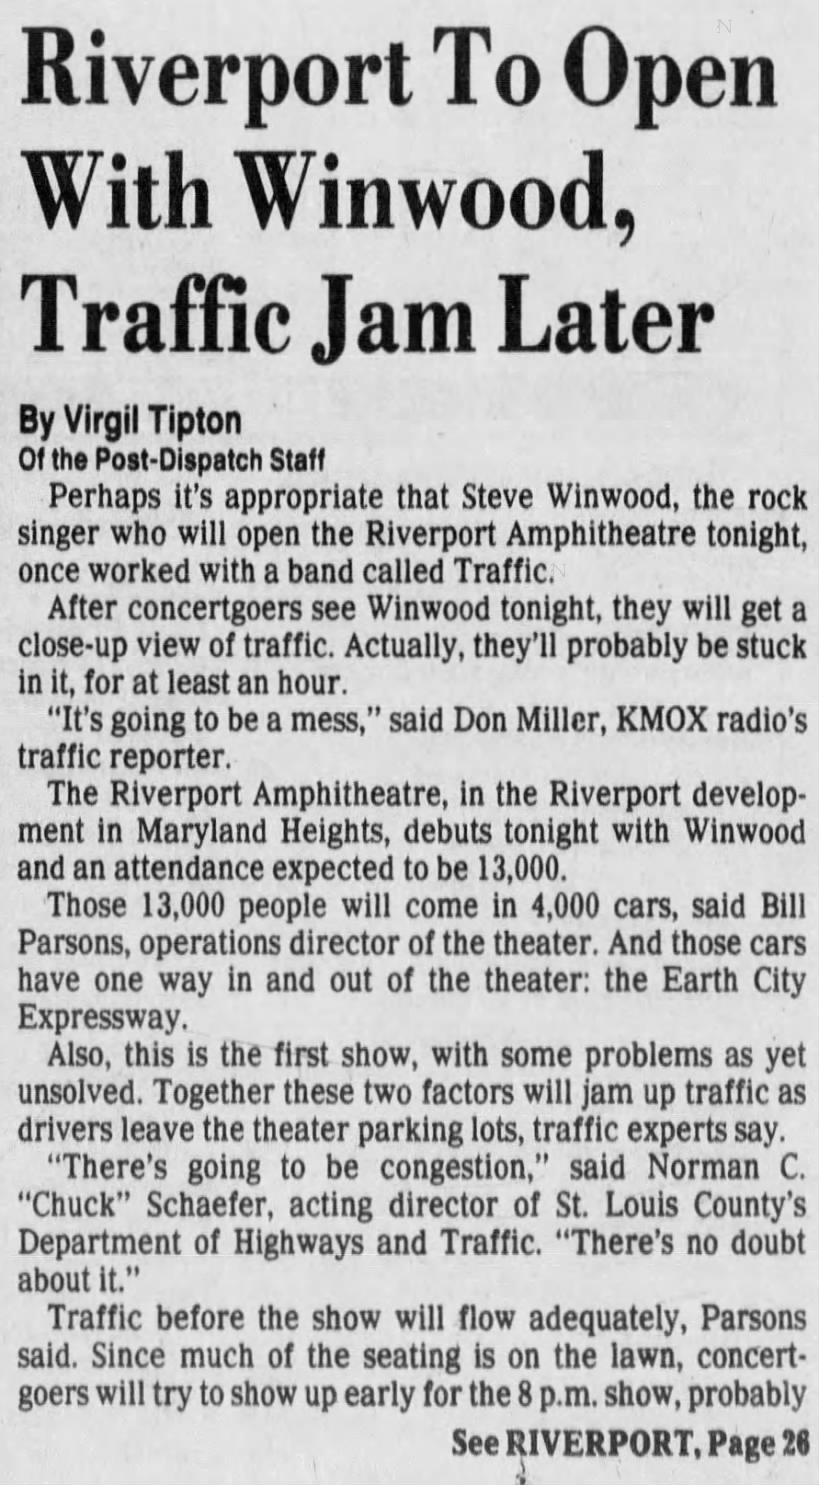 June 14 1991: Riverport's opening night: Steve Winwood during the show, traffic after